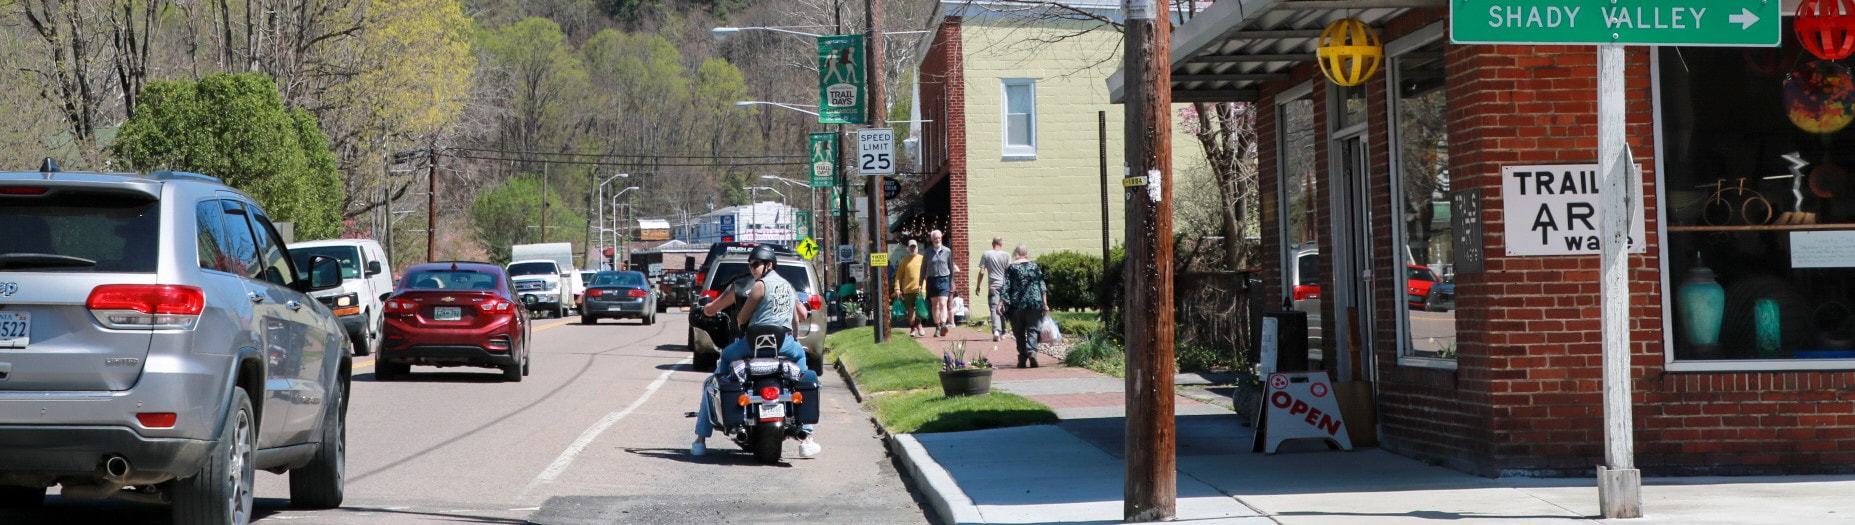 Motorists and motorcycles in downtown Damascus Virginia